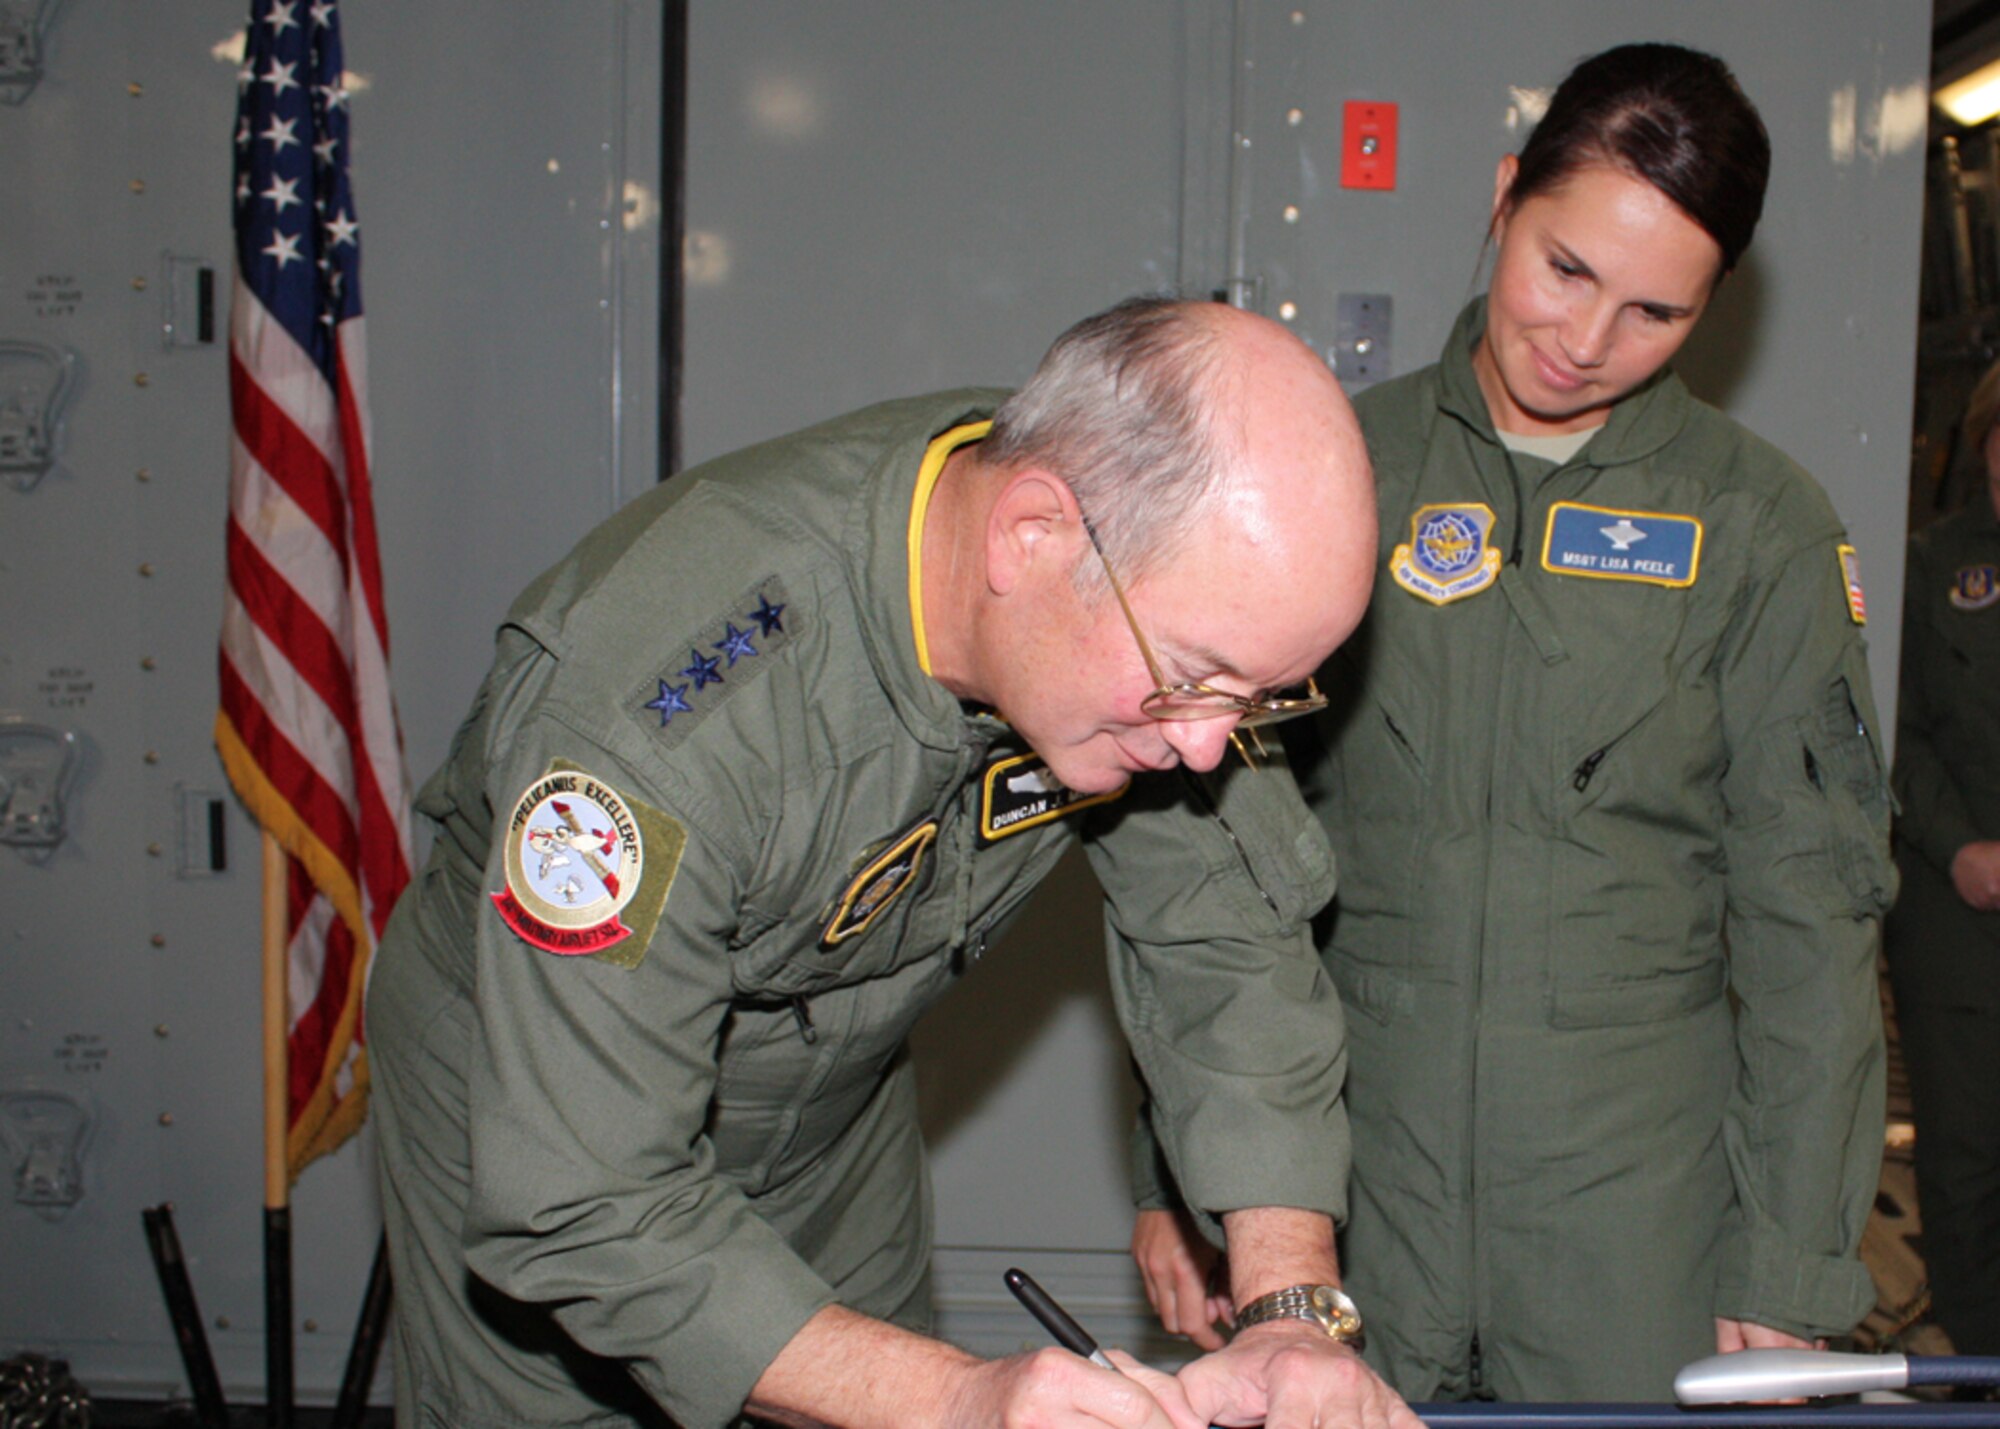 Gen. Duncan McNabb, U.S. Transportation Command commander, signs Master Sgt.
Lisa Peele's reenlistment papers after officiating her reenlistment on Sgt.
Peele's first-ever C-17 flight.  Sergeant Peele will attend the First
Sergeant Academy beginning Oct. 25 and is designated to become the first
sergeant for Charleston's 14th Airlift Squadron after graduation.  Sergeant
Peele's new assignment comes little more than two years after an accident
claimed her husband's life and severely injured her.  Her husband had
recently attended first sergeant training, as she was preparing to submit
her formal application for the First Sergeant Academy when the accident
occurred.
